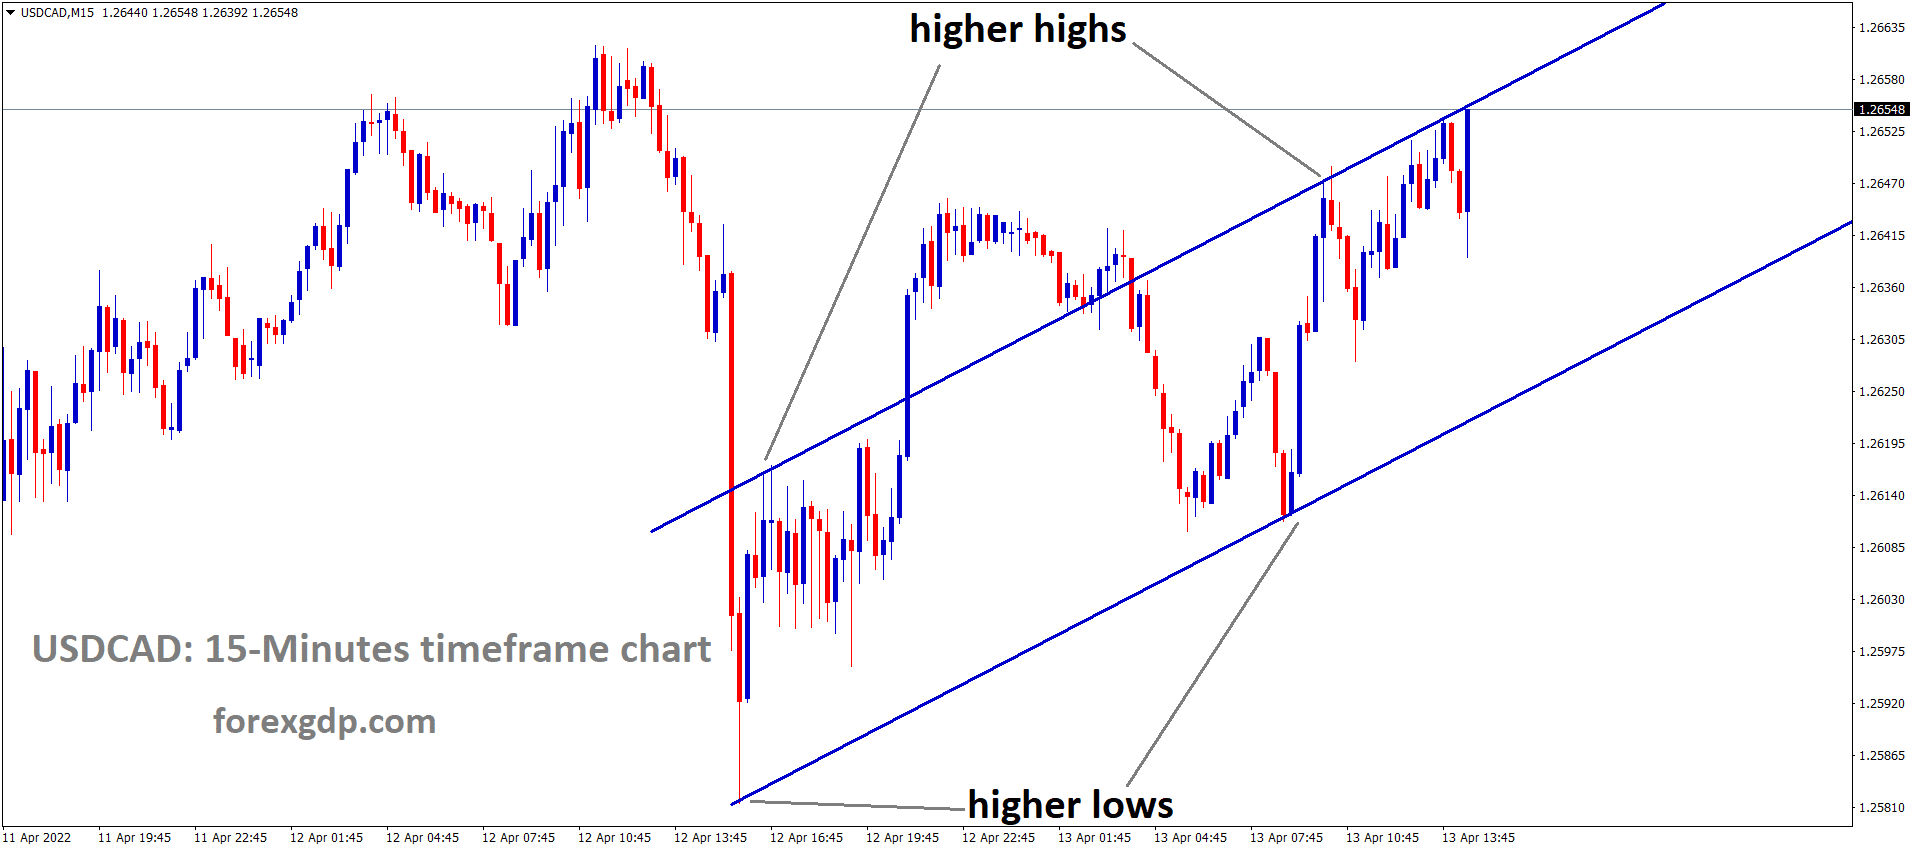 USDCAD 15 Time Frame Analysis Market is moving in an Ascending channel and the market has reached the higher high area of the Ascending Channel.